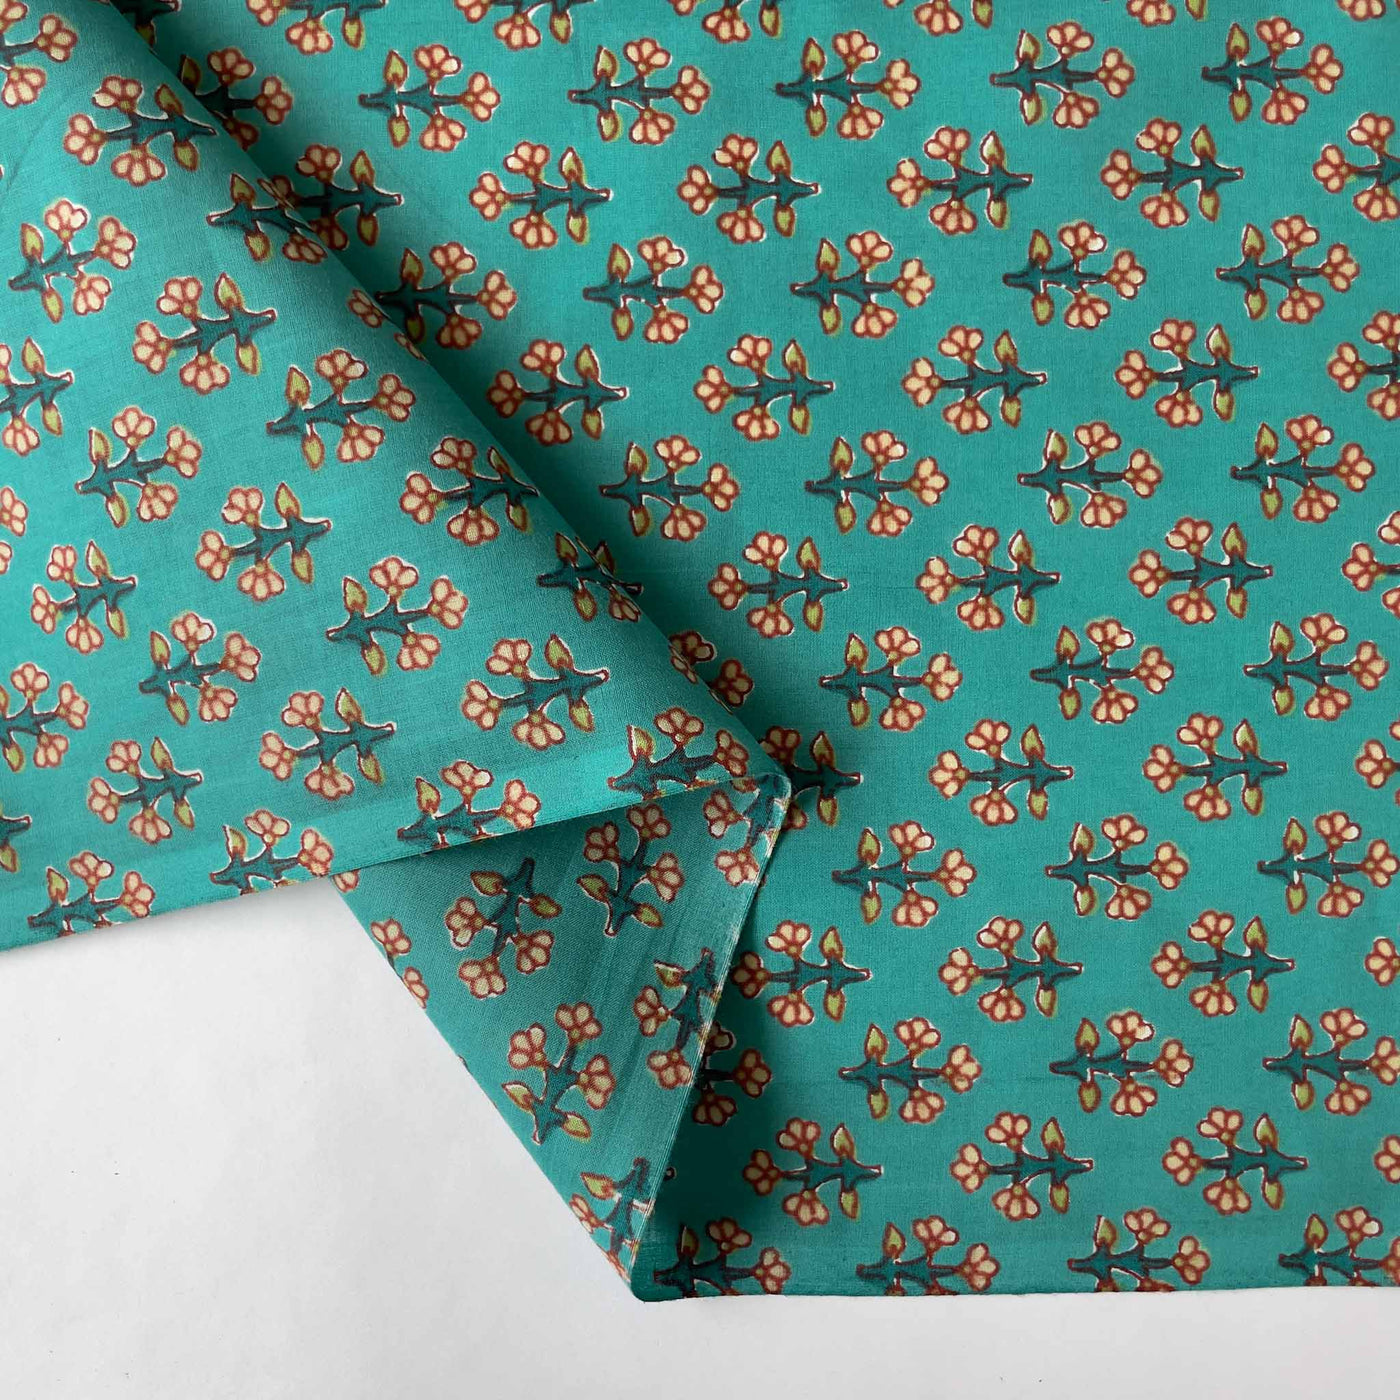 Screen Printed Cotton Fabric Cut Piece (CUT PIECE) Aquamarine & Orange Abstract Floral Screen Printed Pure Cotton Fabric (Width 43 inches)